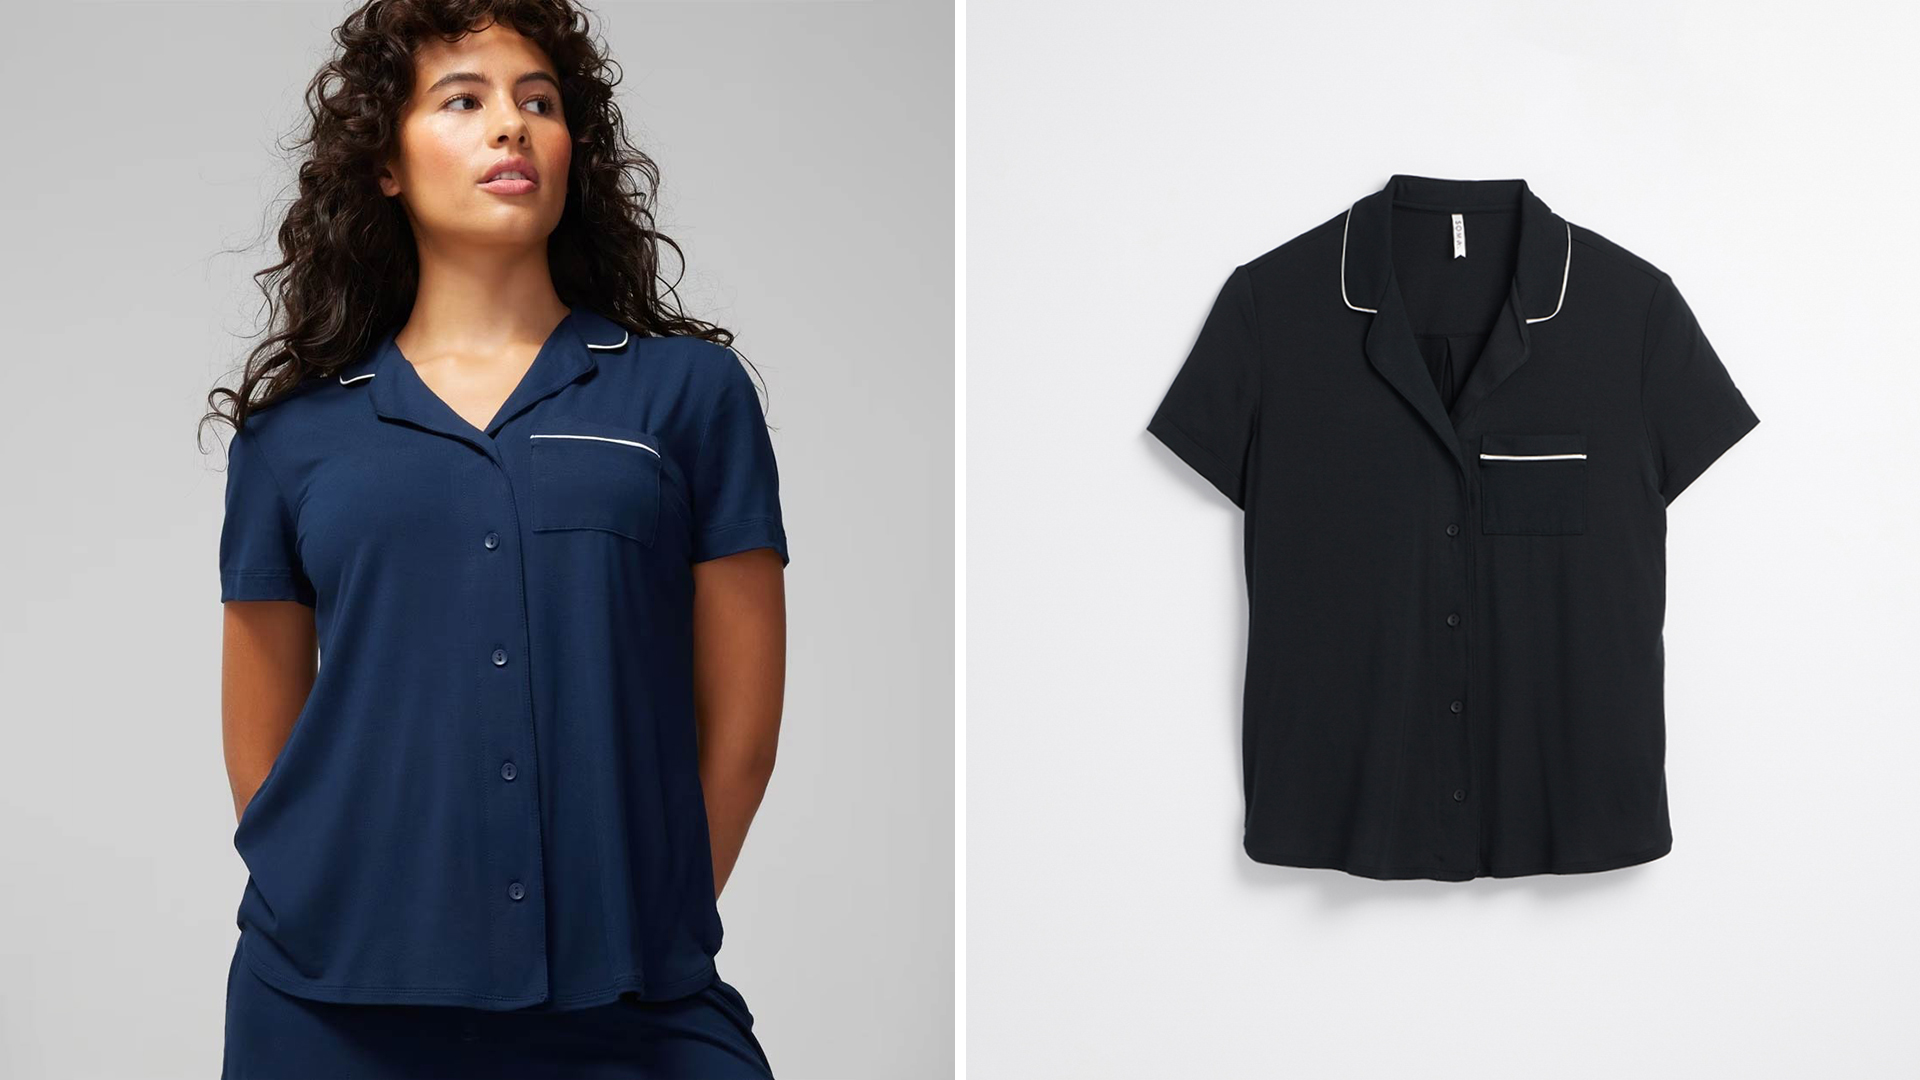 (Left) Soma<sup class=st-superscript>®</sup> women’s model wearing a navy blue short-sleeve notch collar pajama top. (Right) Soma<sup class=st-superscript>®</sup> laydown of a black short-sleeve notch collar pajama top